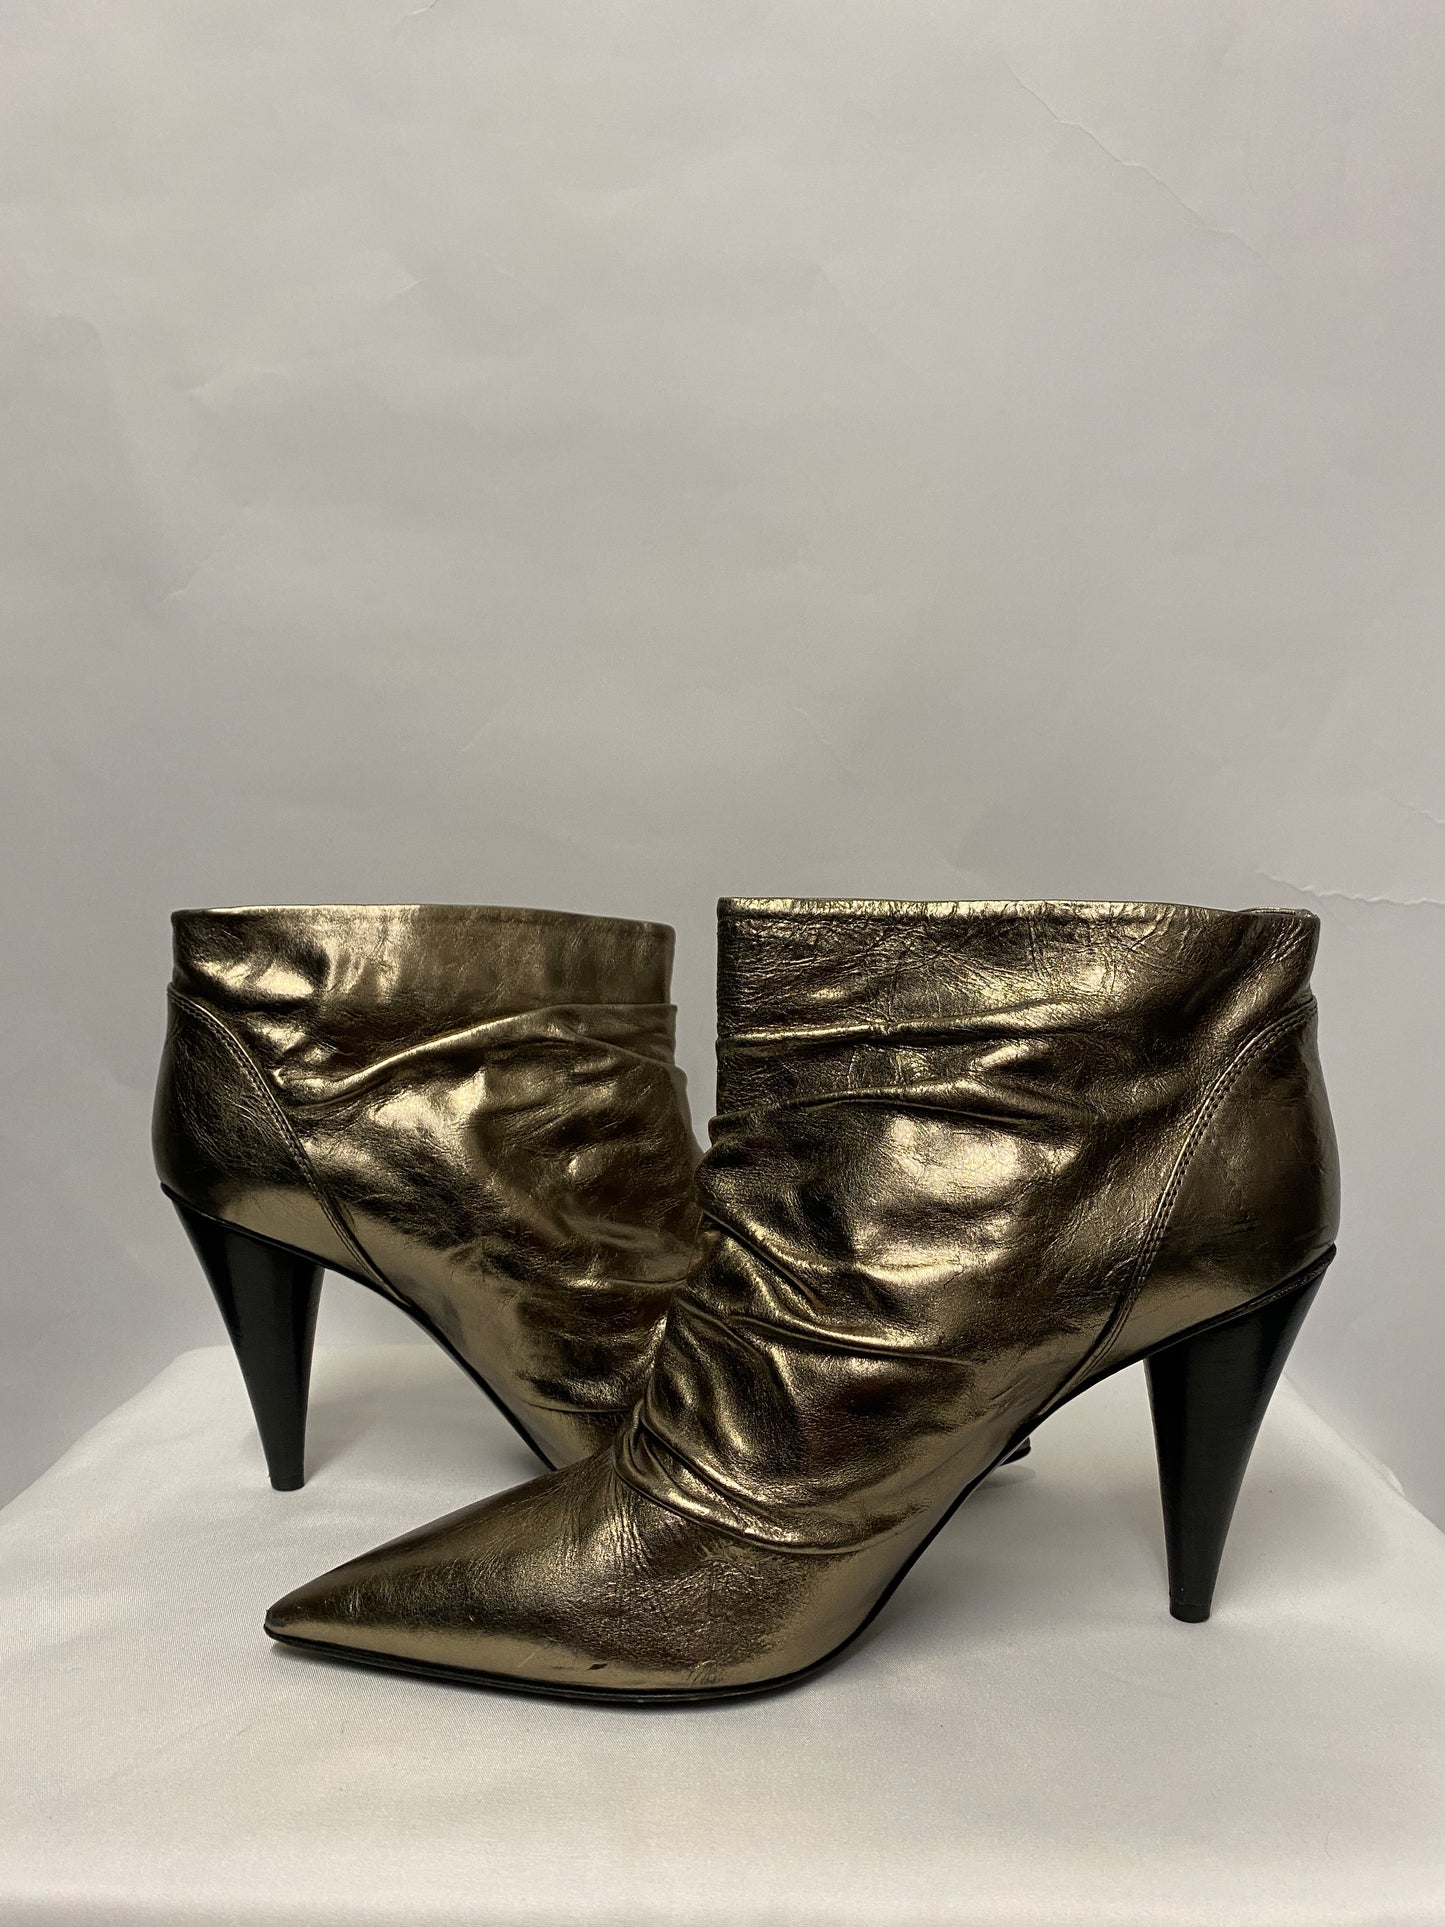 Sergio Rossi Gold High Heel Ankle Boots 7